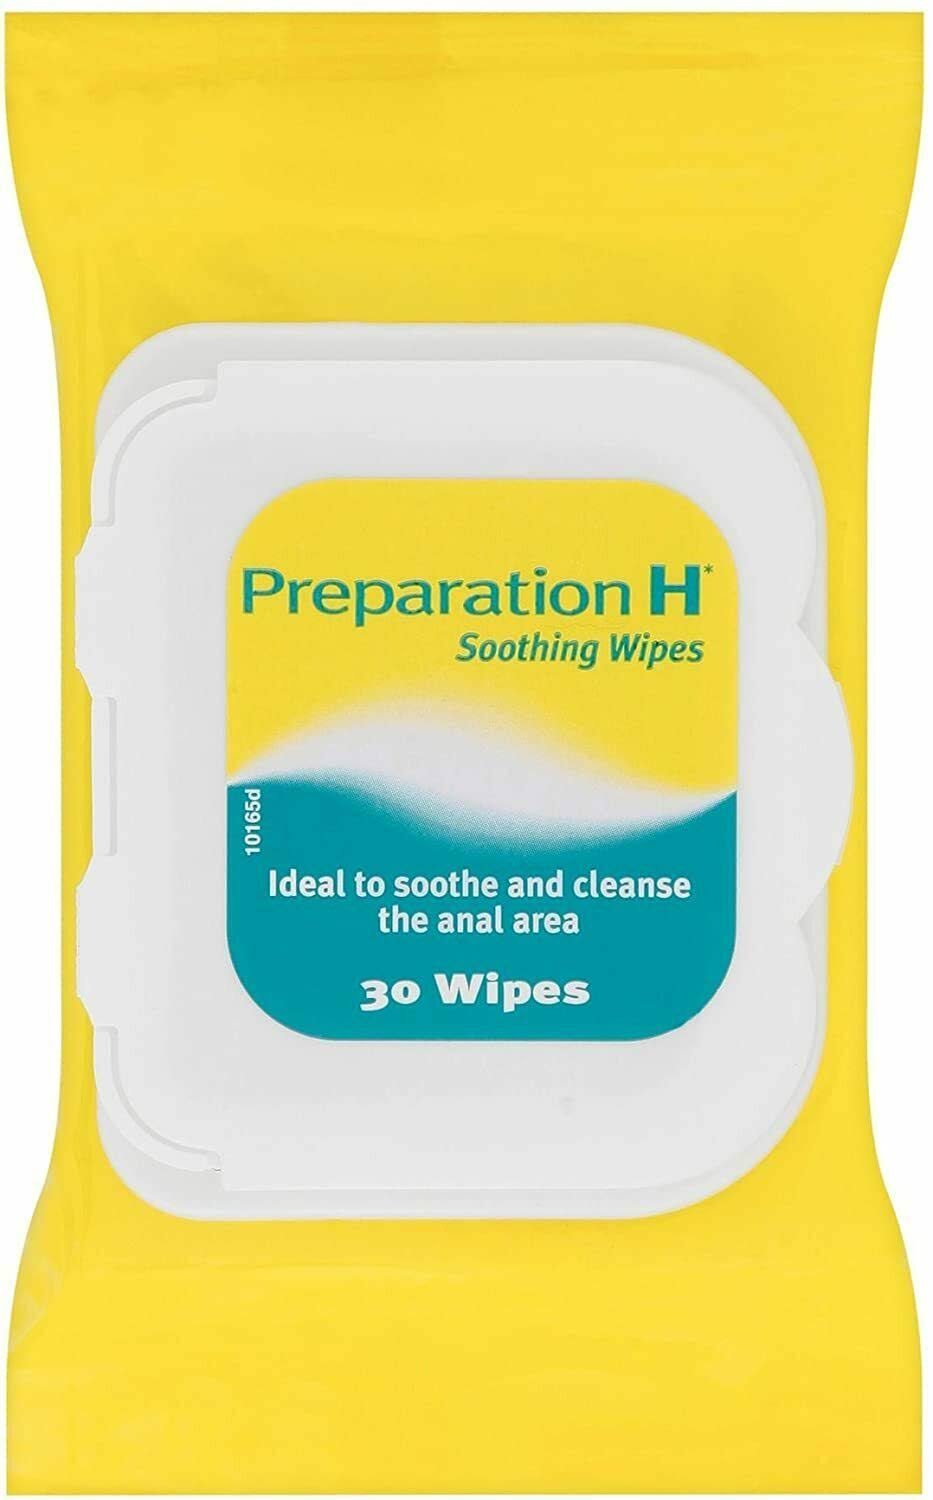 Preparation H Soothing Wipes - 30ct